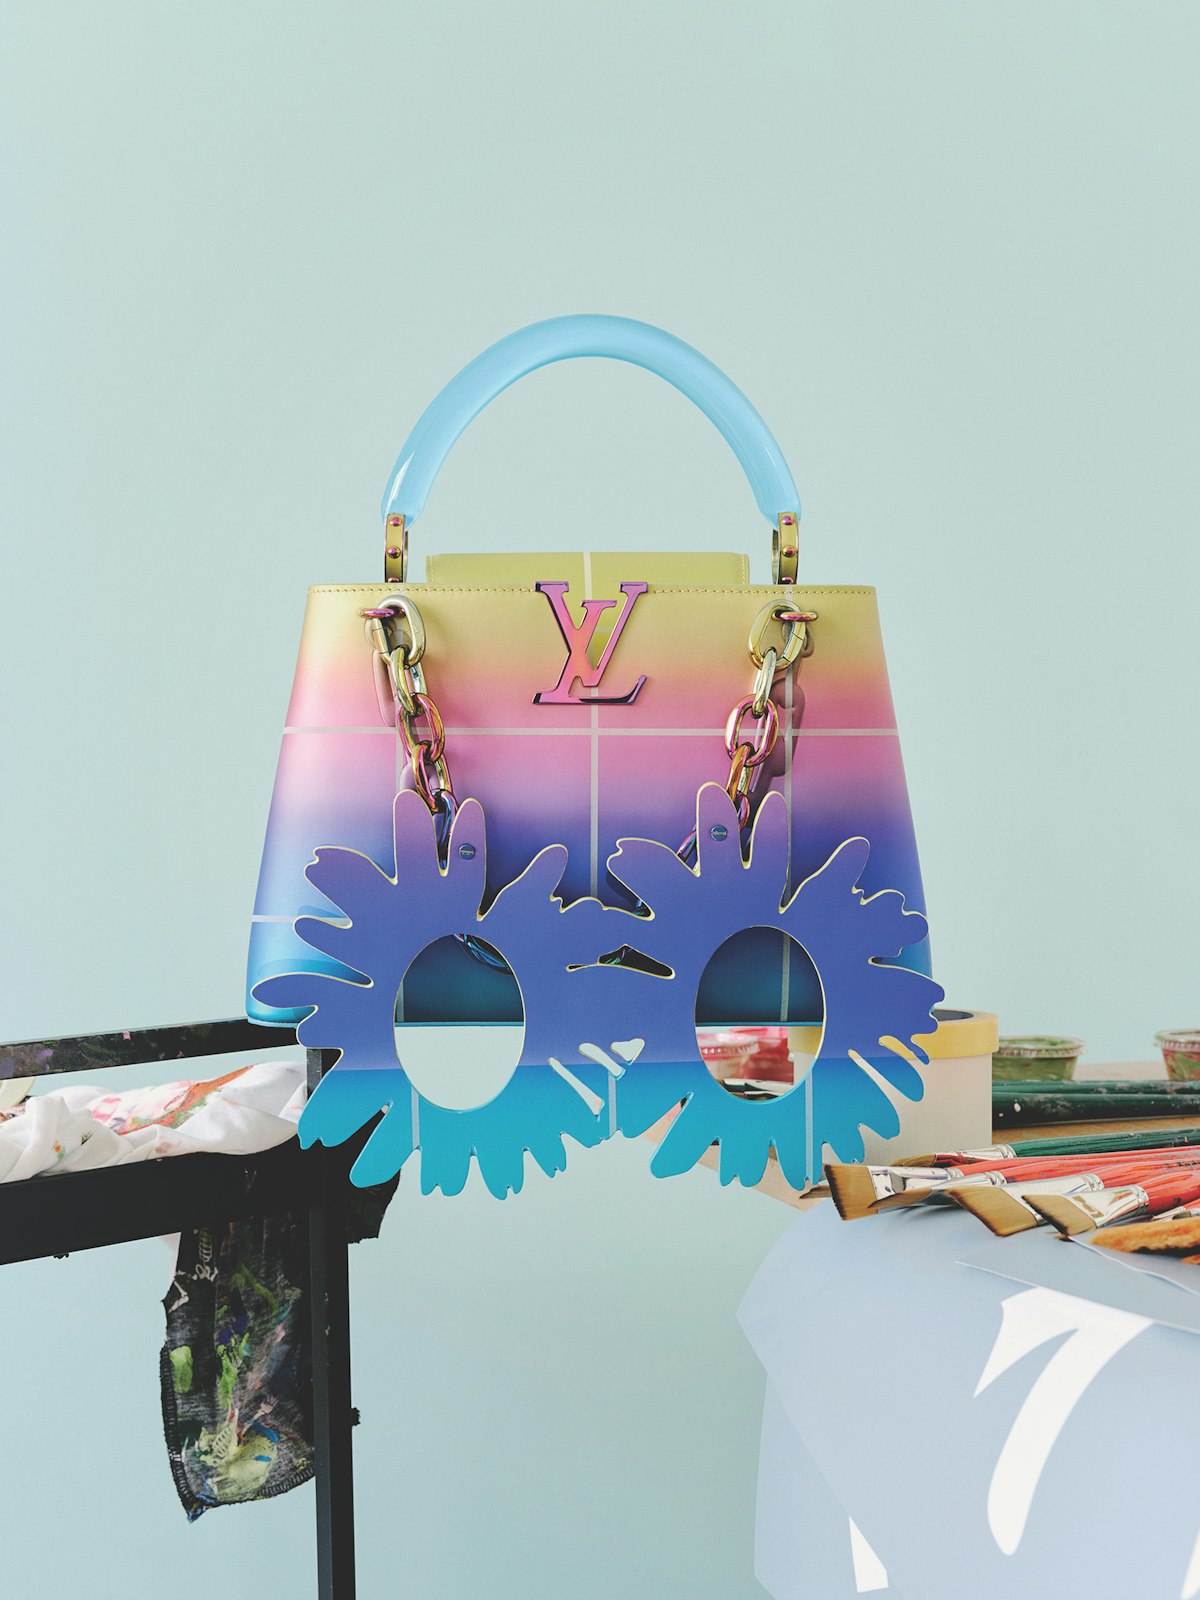 Louis Vuitton's Limited-Edition ArtyCapucine Bag Comes With